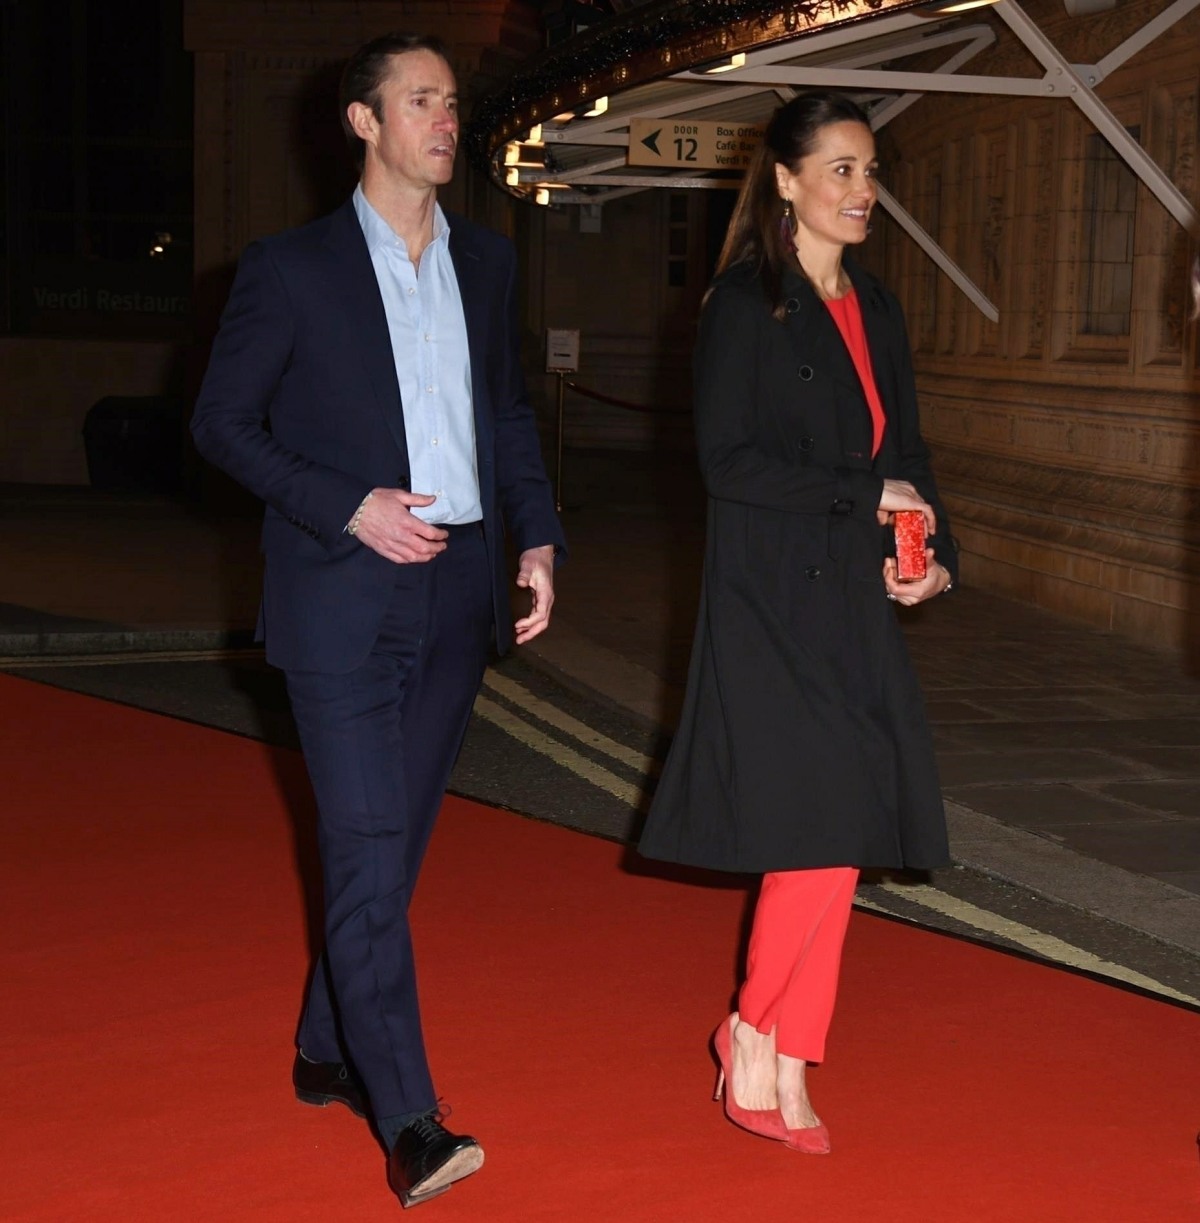 Pippa Middleton puts on a stylish display with husband James Matthews as they attend the Cirque du Soleil's 'Luizia' at the Royal Albert Hall